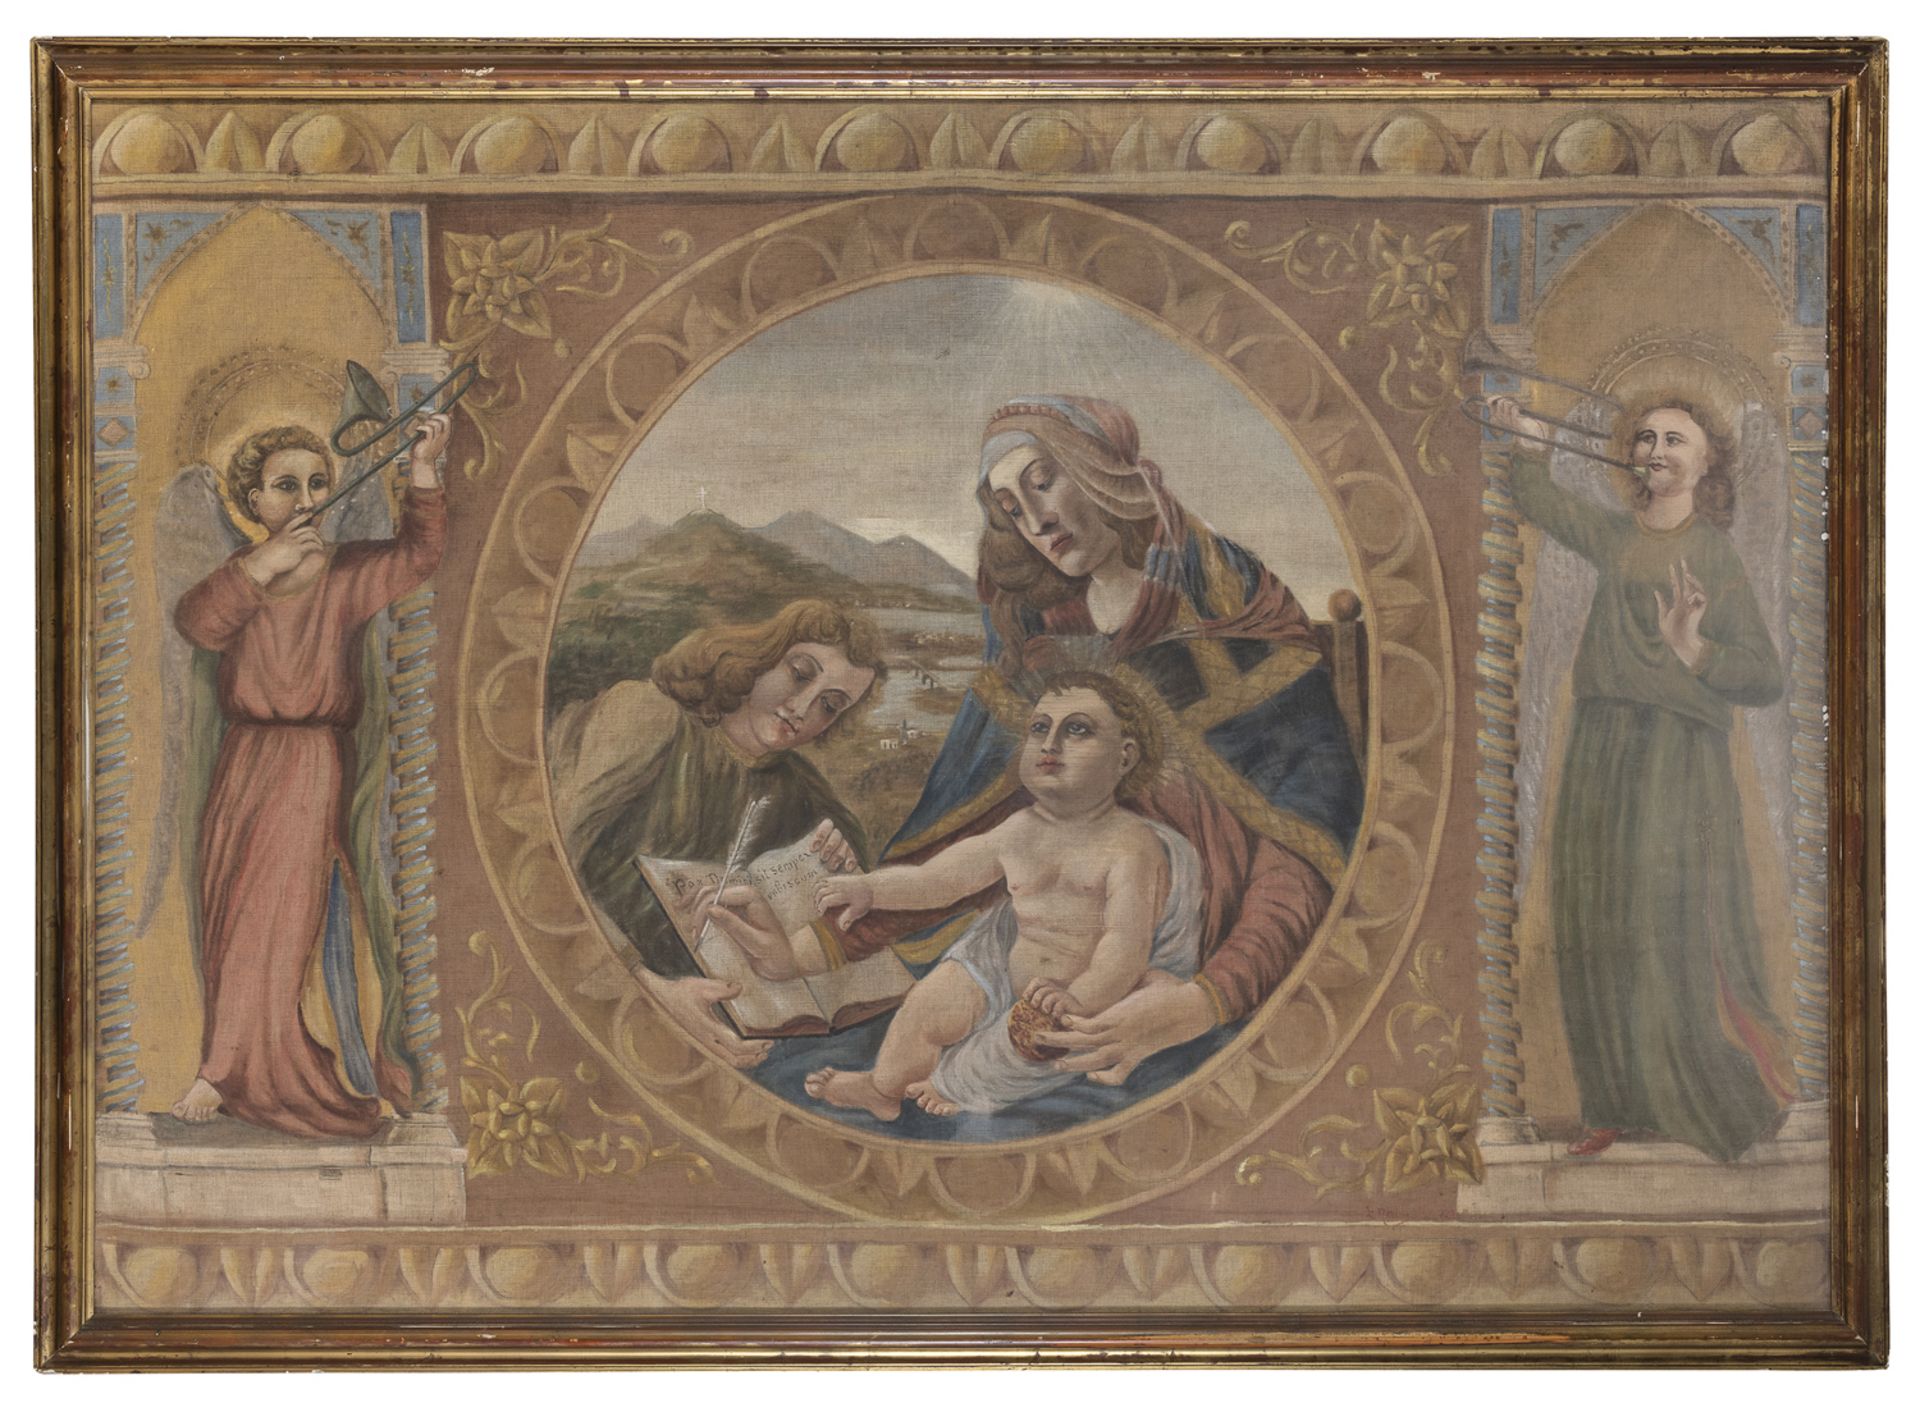 GRASS JUICE TAPESTRY DEPICTING MADONNA AND CHILD LATE 19TH CENTURY